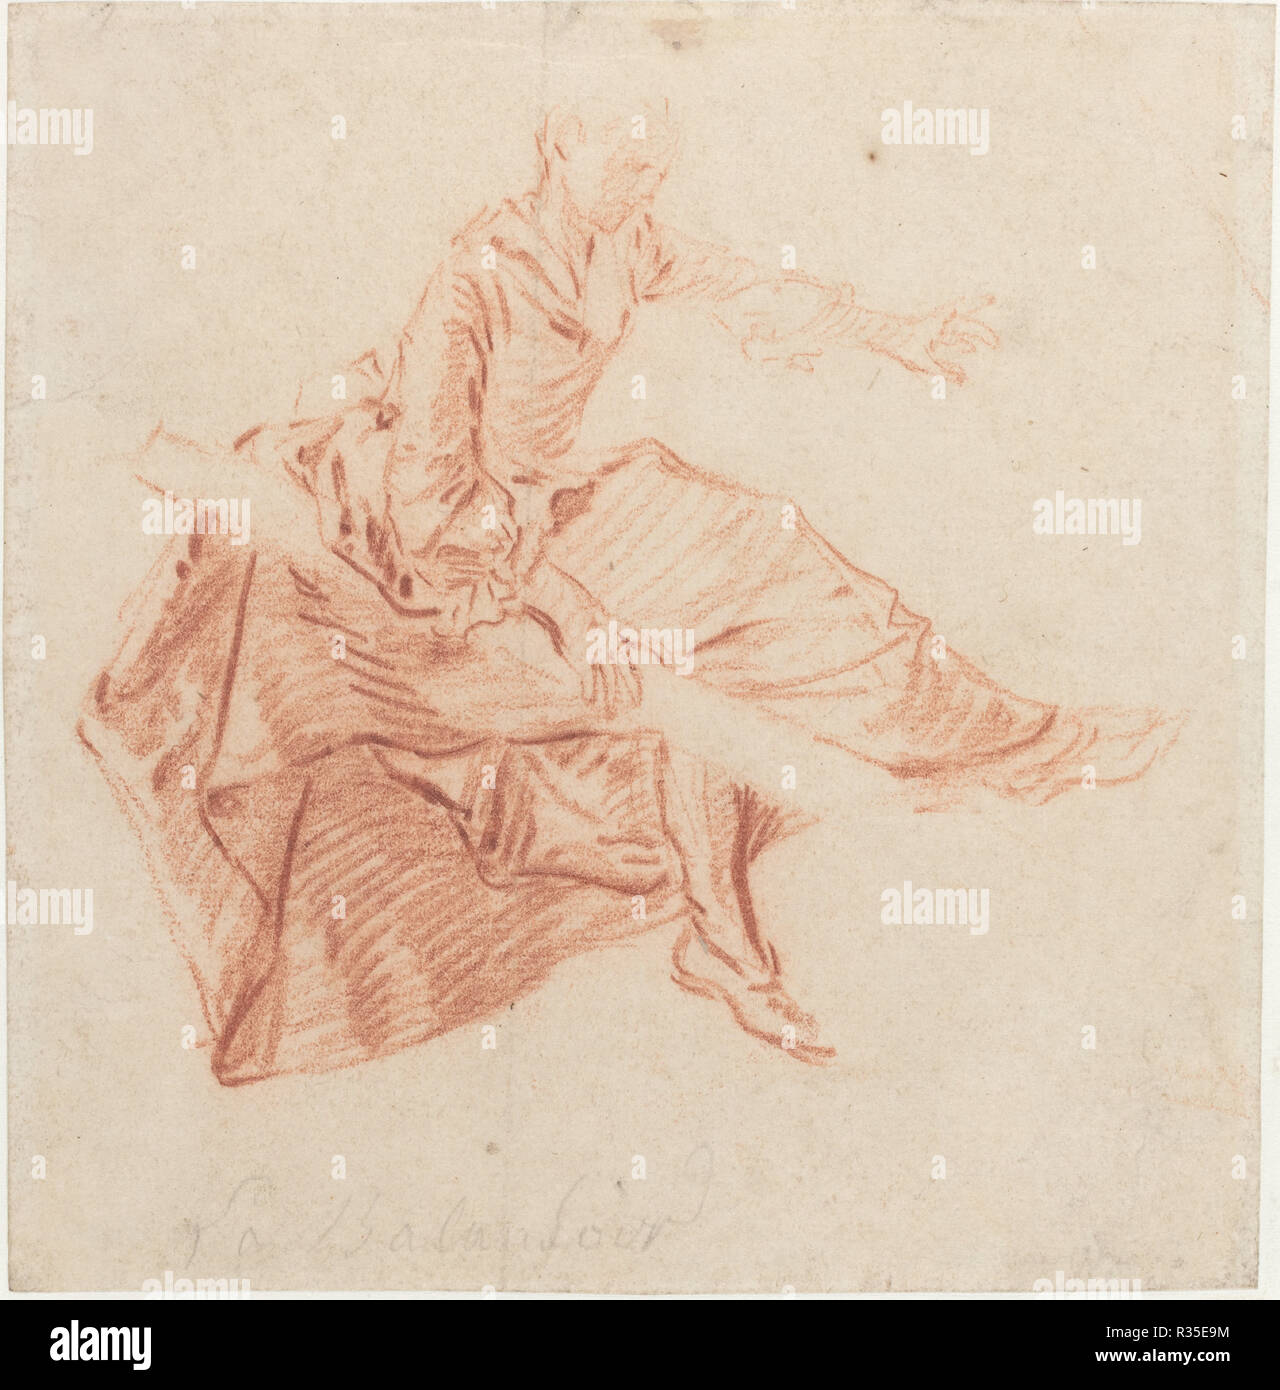 Lady Seated on a See-Saw. Dimensions: overall: 14.7 x 14.2 cm (5 13/16 x 5 9/16 in.). Medium: red chalk on laid paper. Museum: National Gallery of Art, Washington DC. Author: Nicolas Lancret. Stock Photo